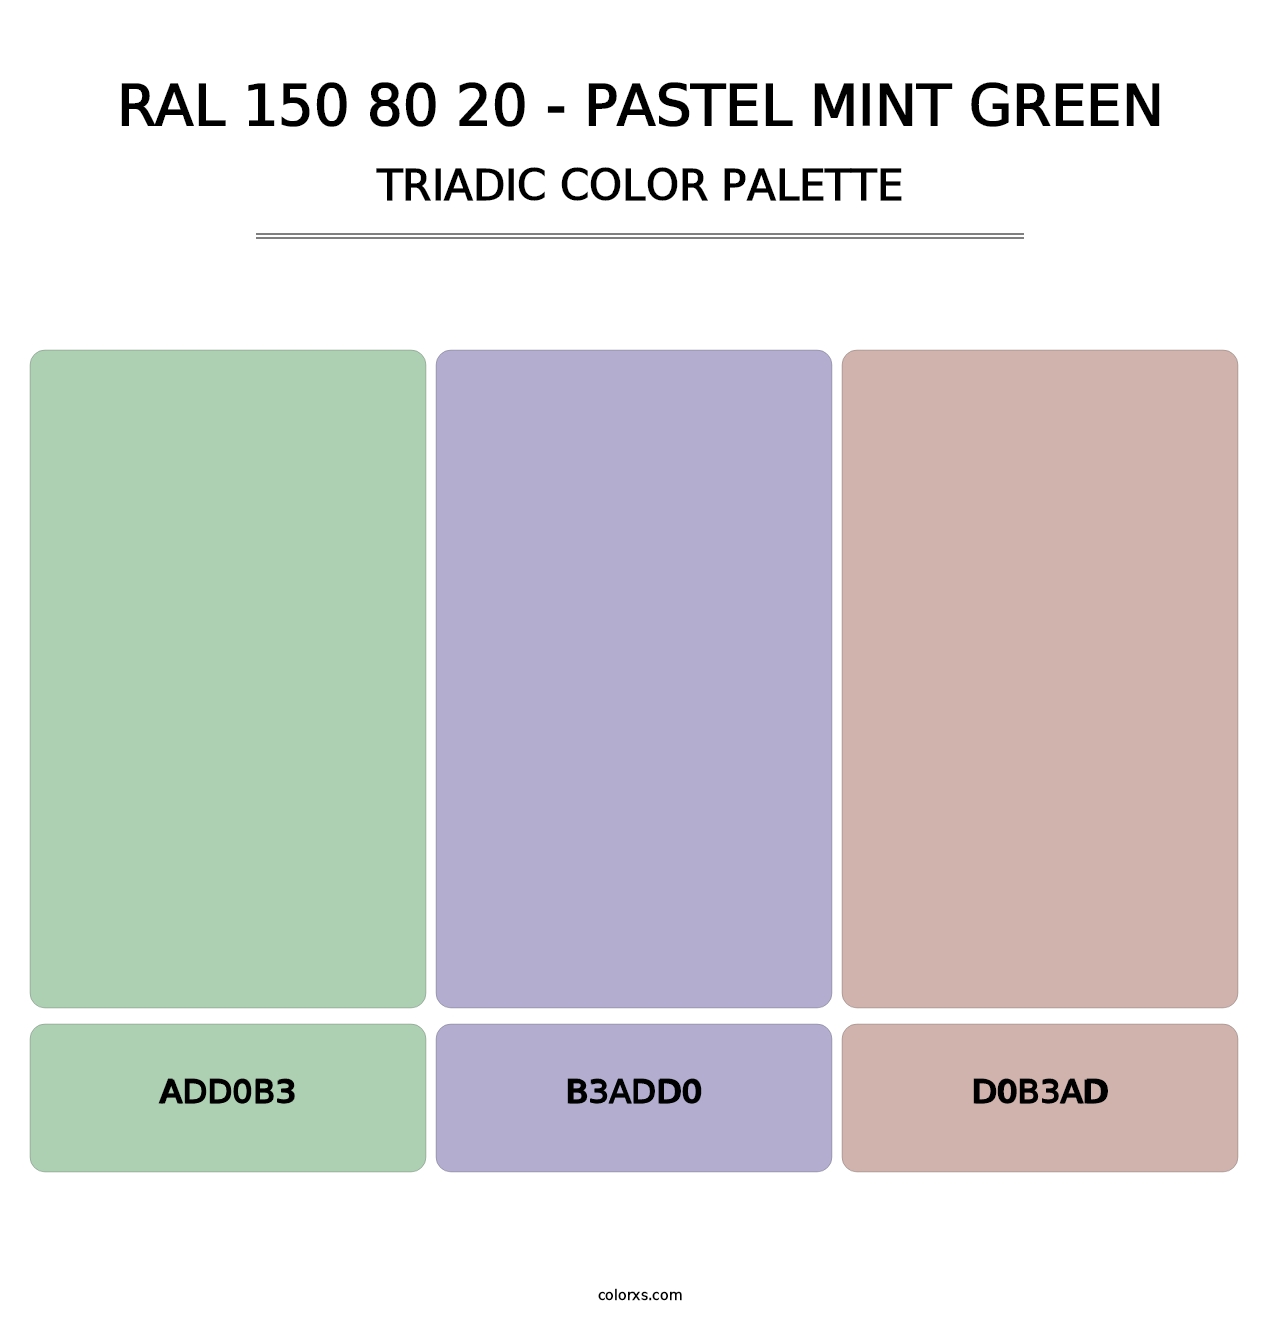 RAL 150 80 20 - Pastel Mint Green - Triadic Color Palette